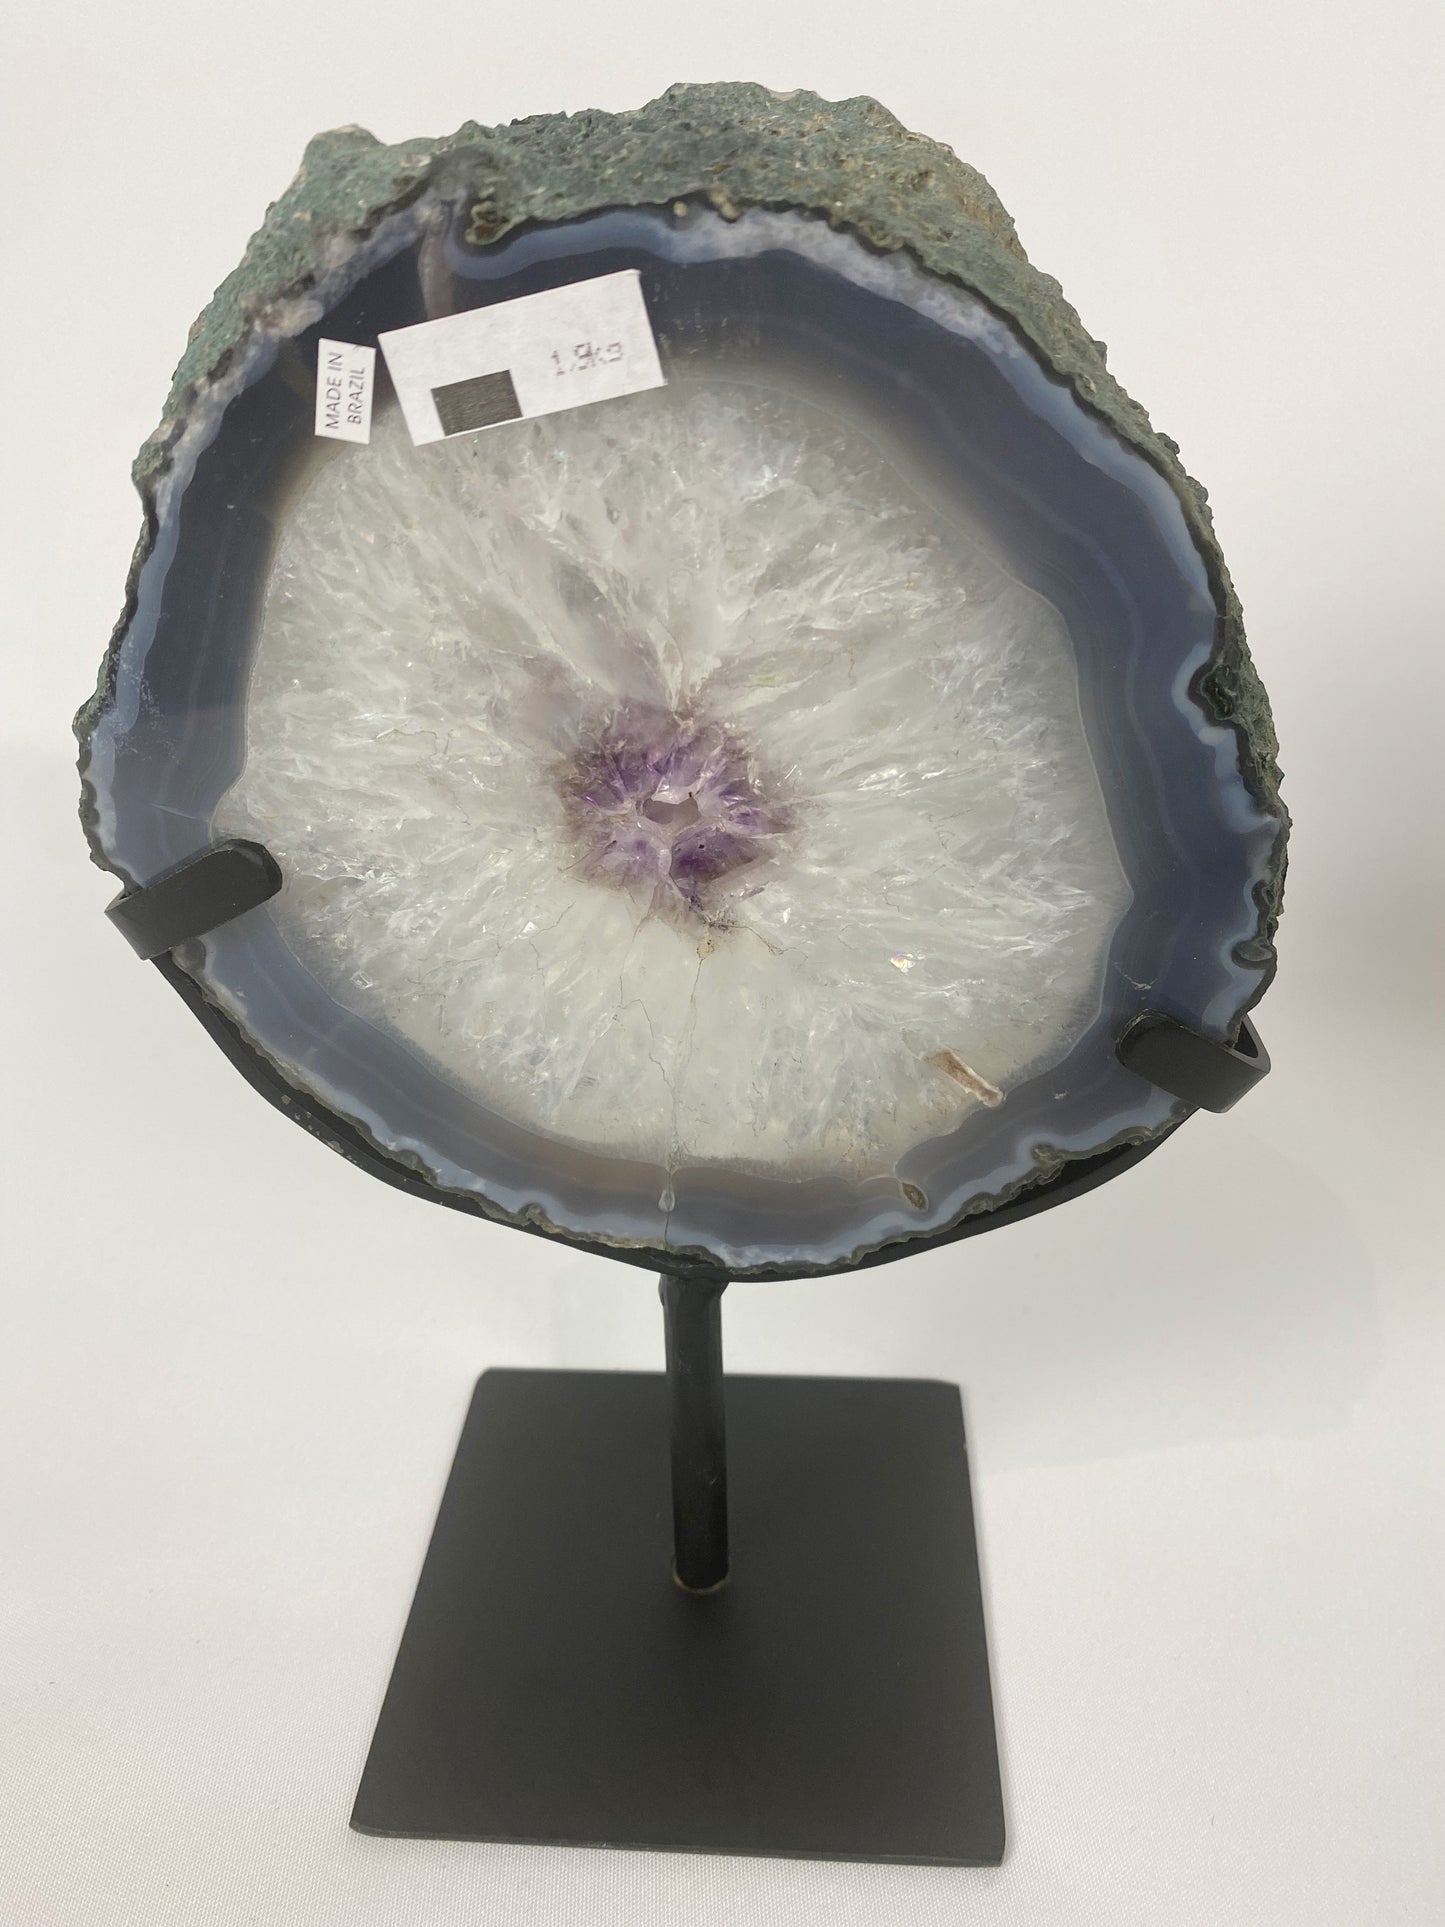 Amethyst Agate on stand